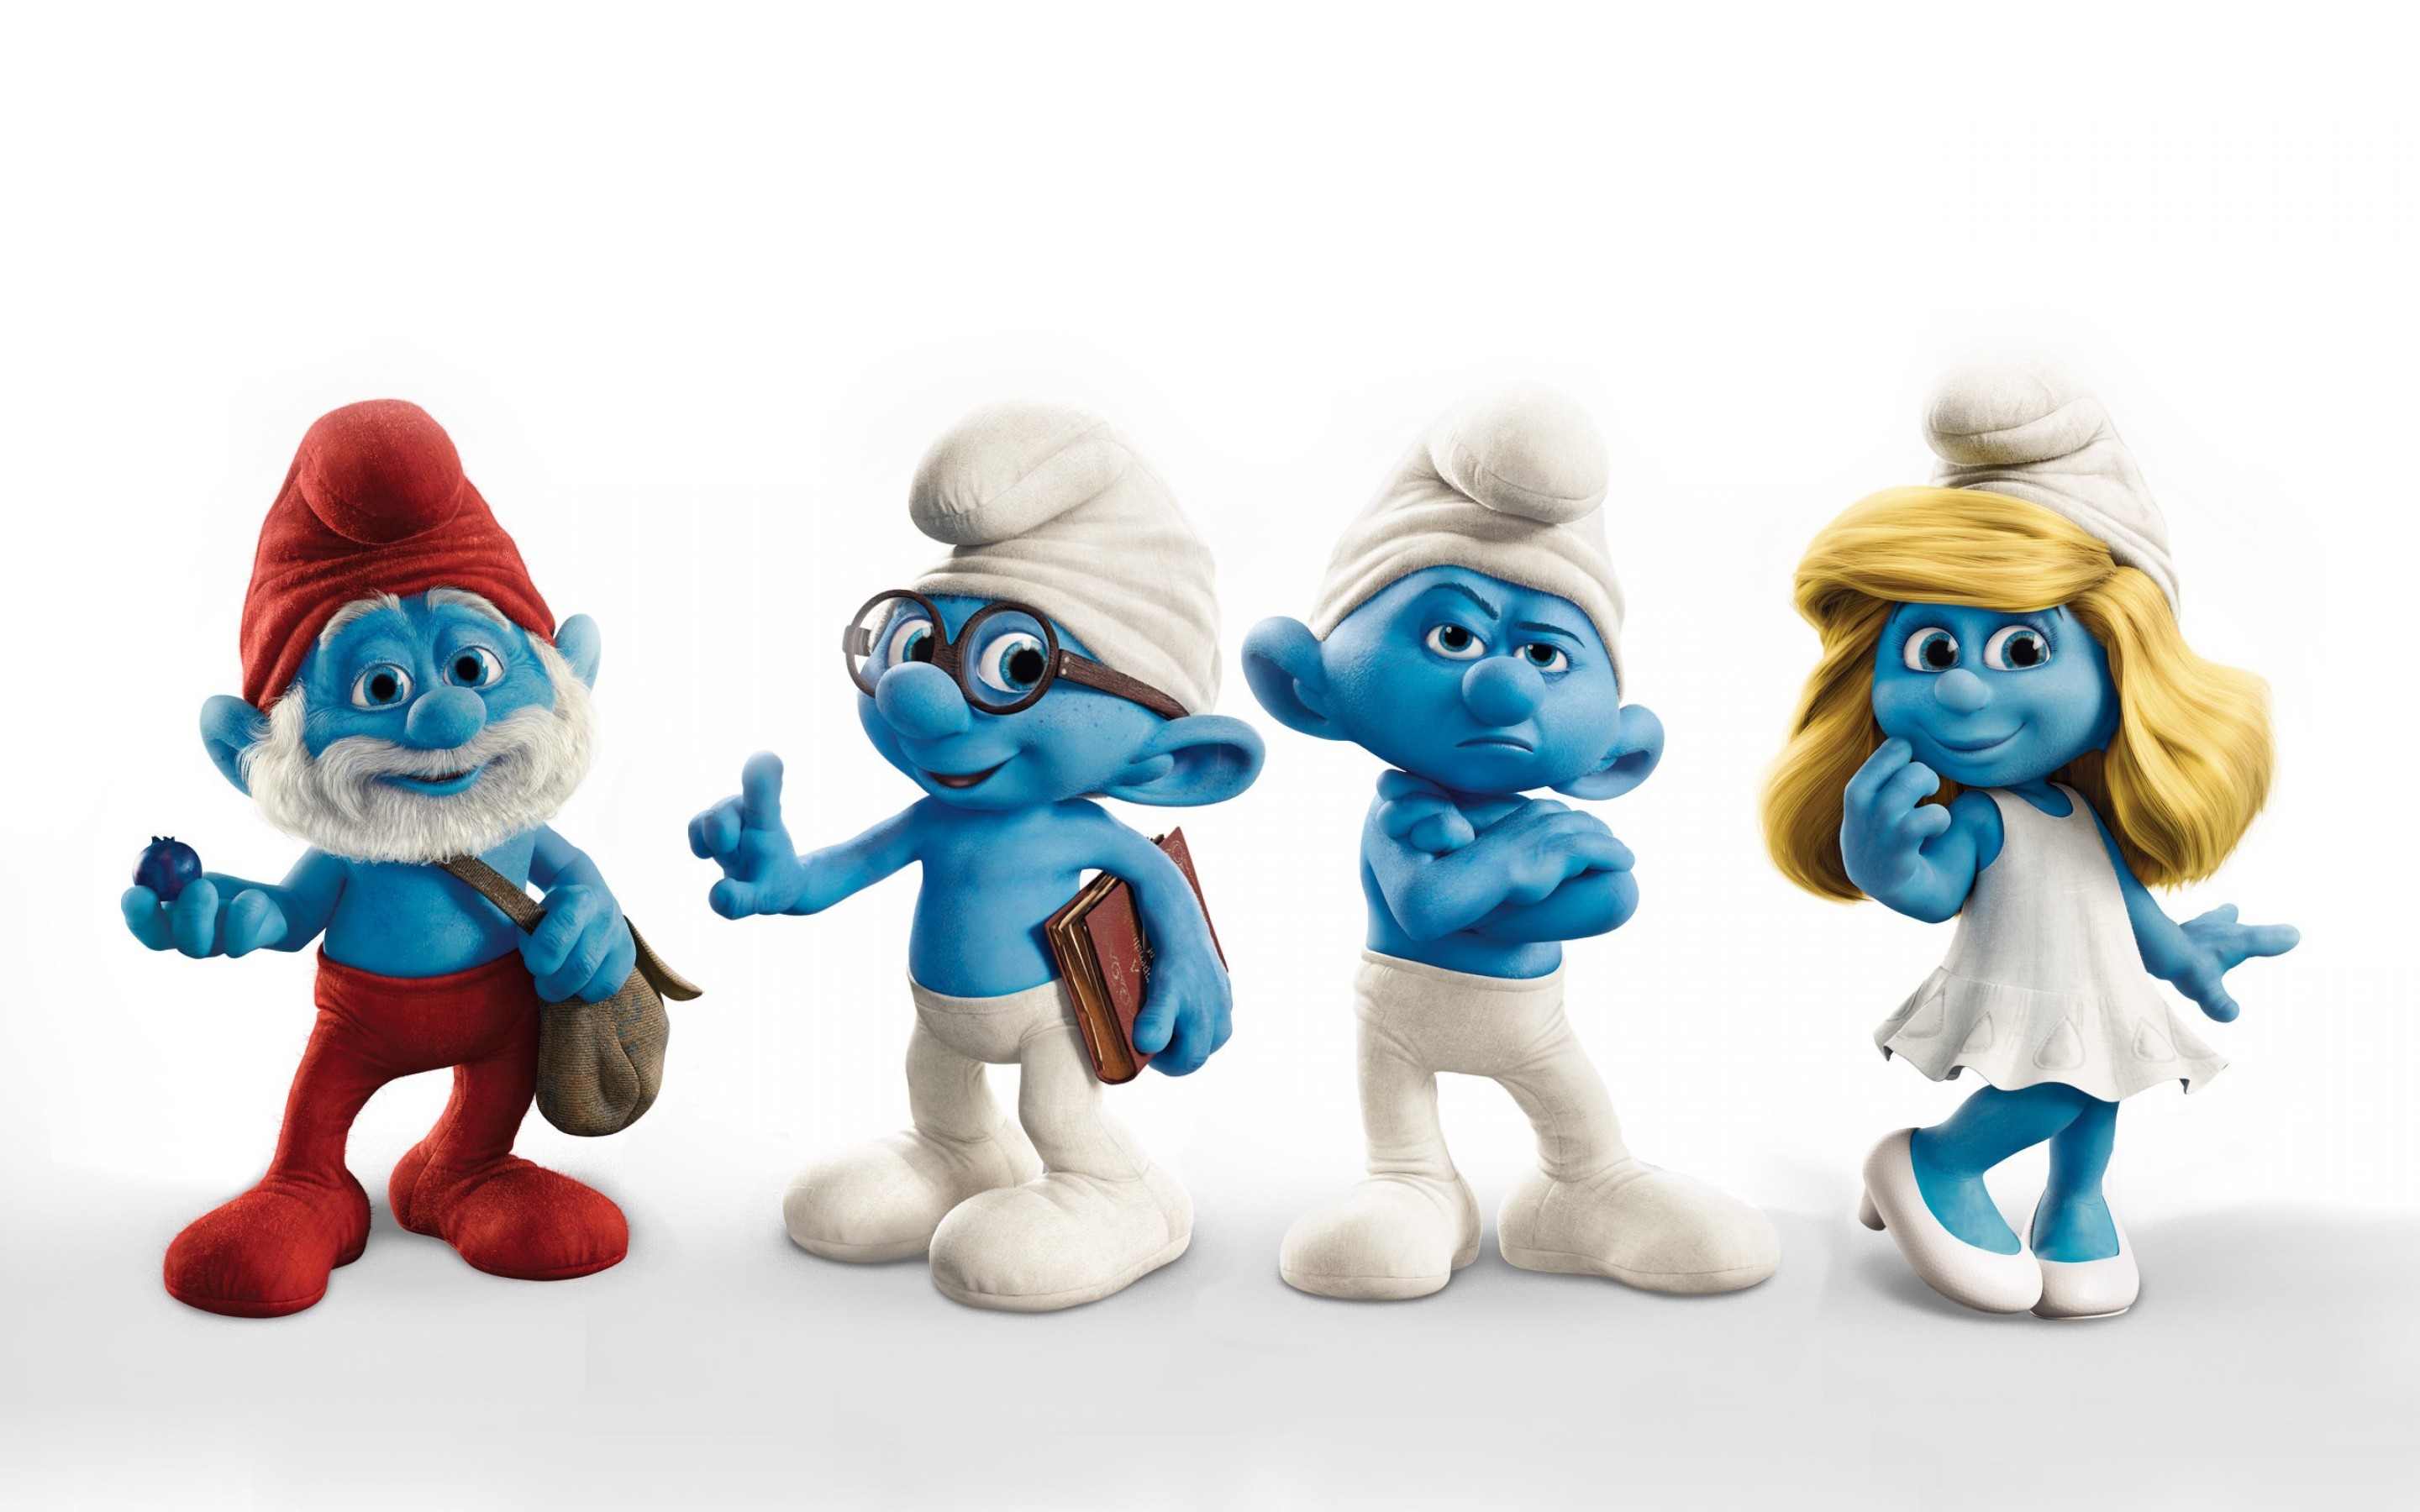 images of smurfs characters